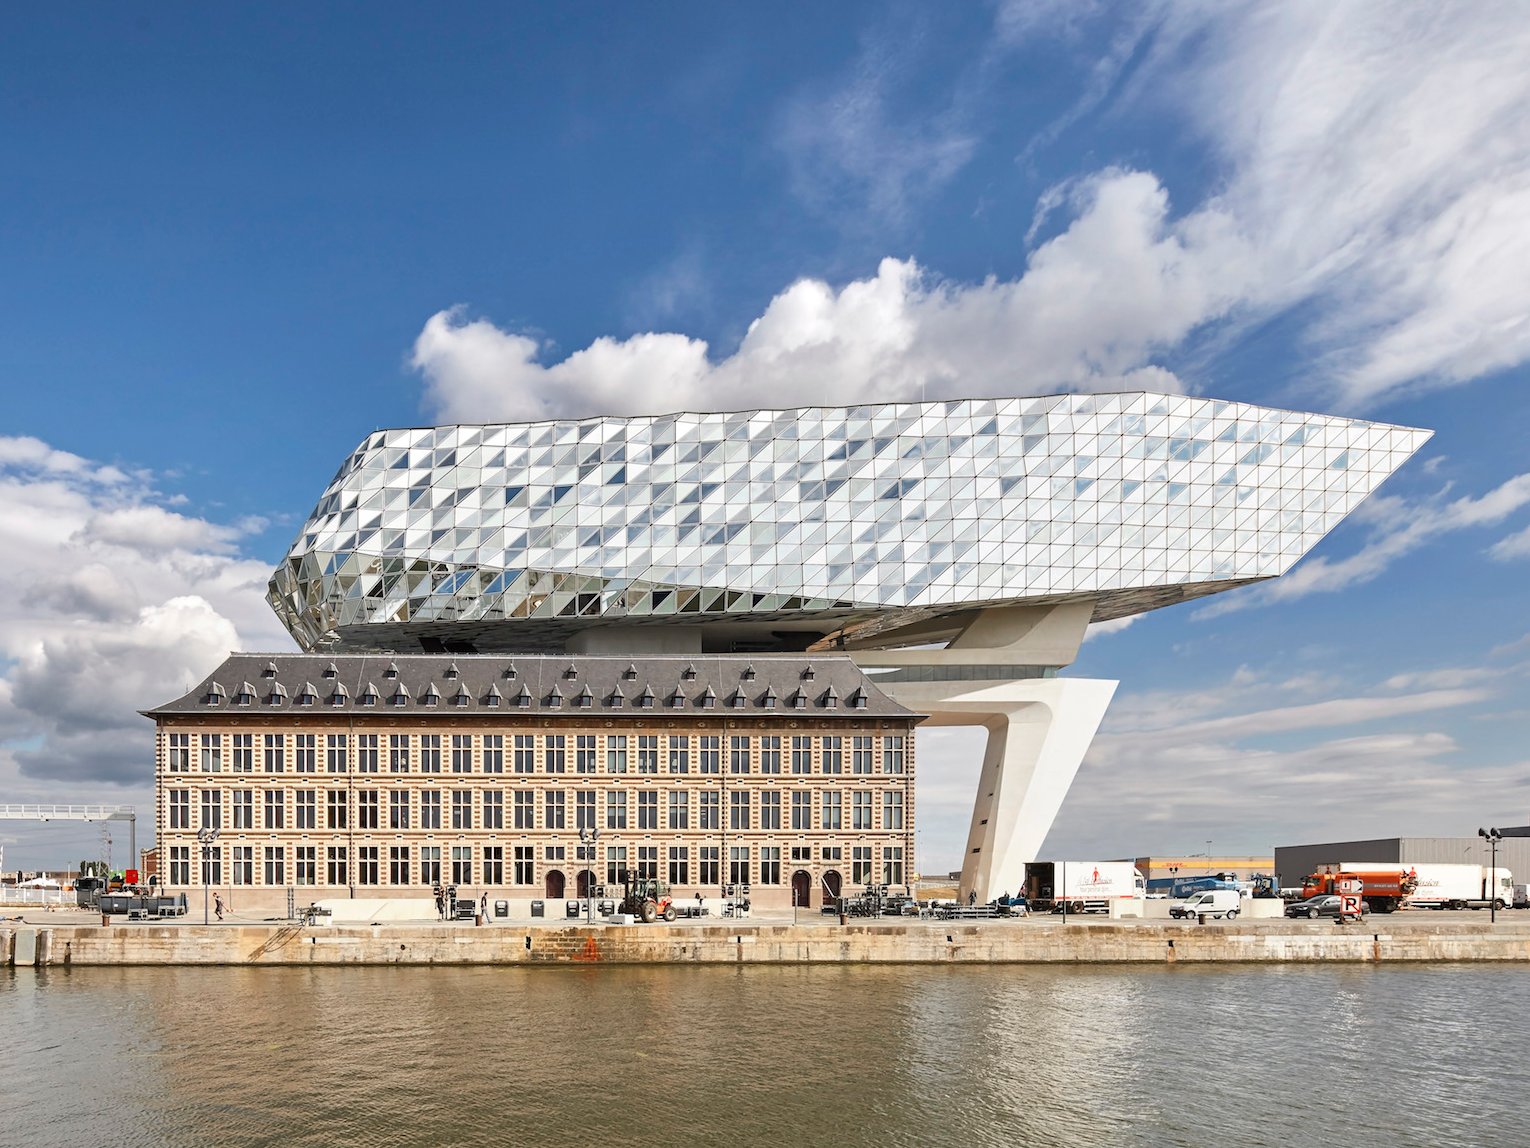 Zaha Hadid’s Antwerp Port House is a Unique Structure Right on the Water